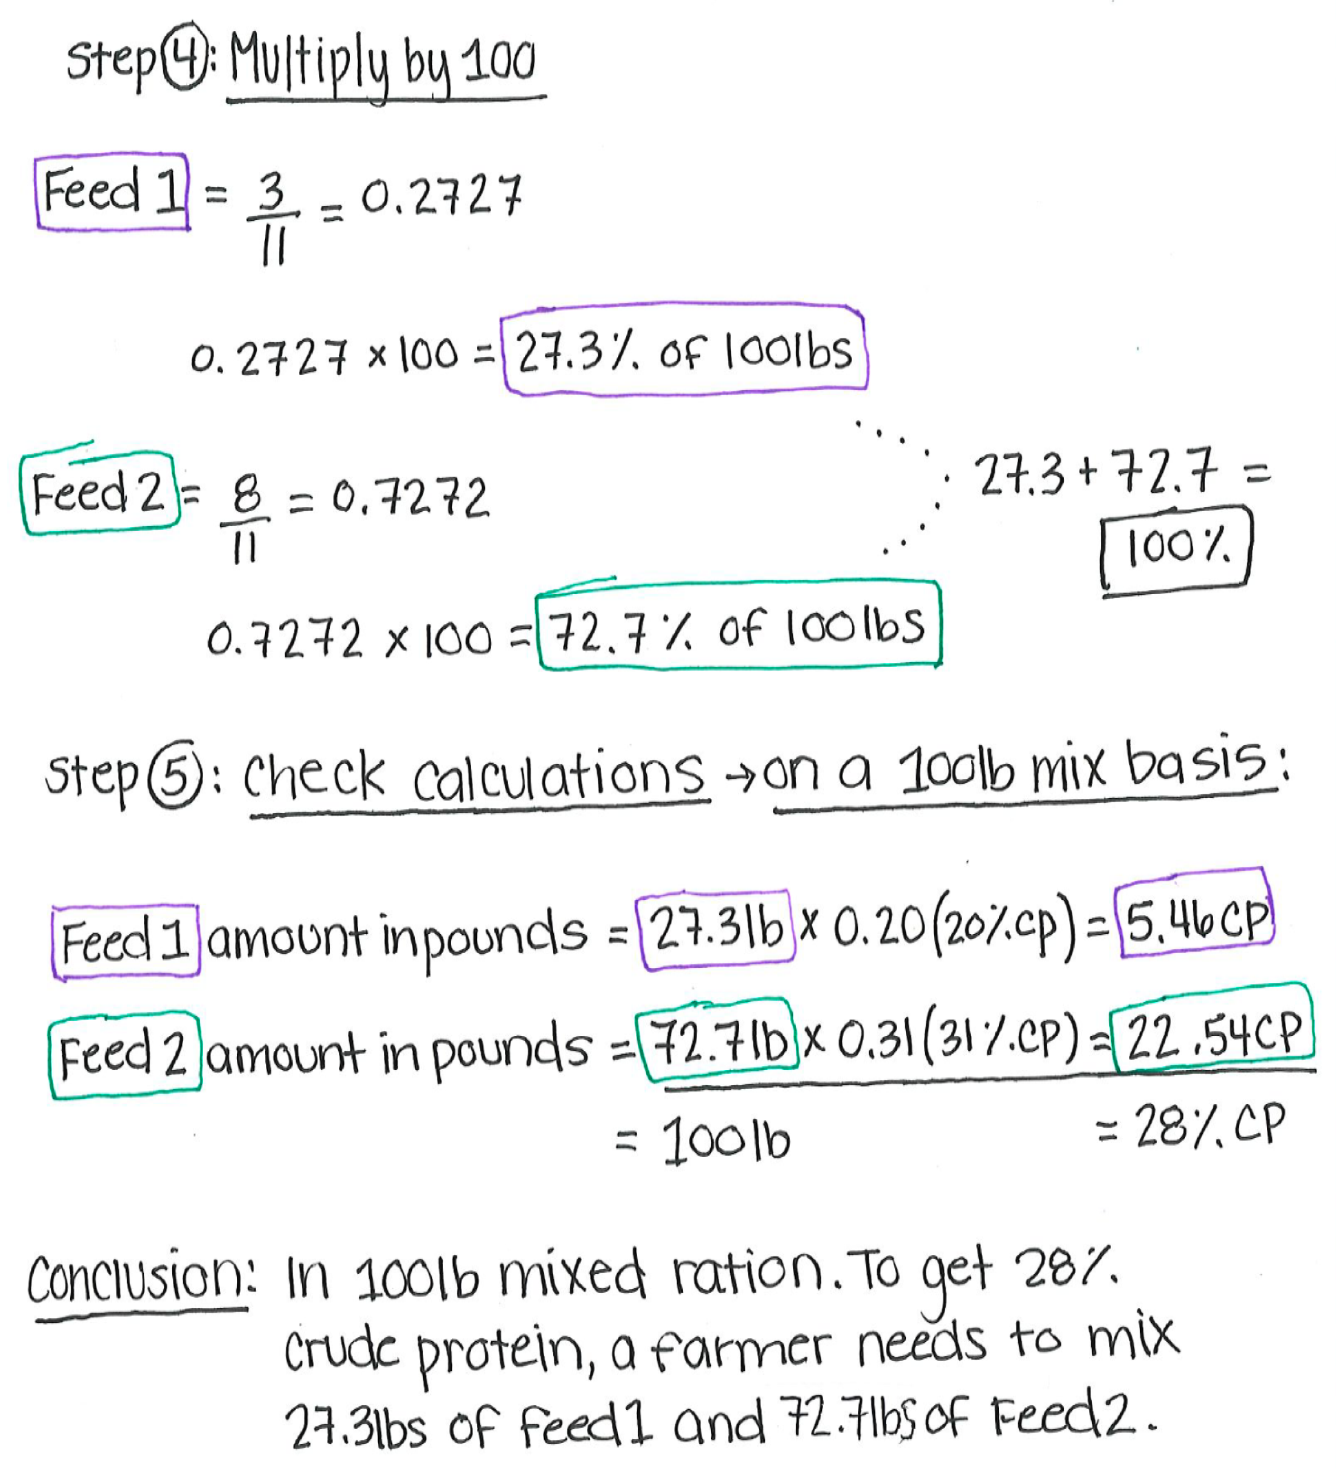 Math and conclusion of ration mixing.